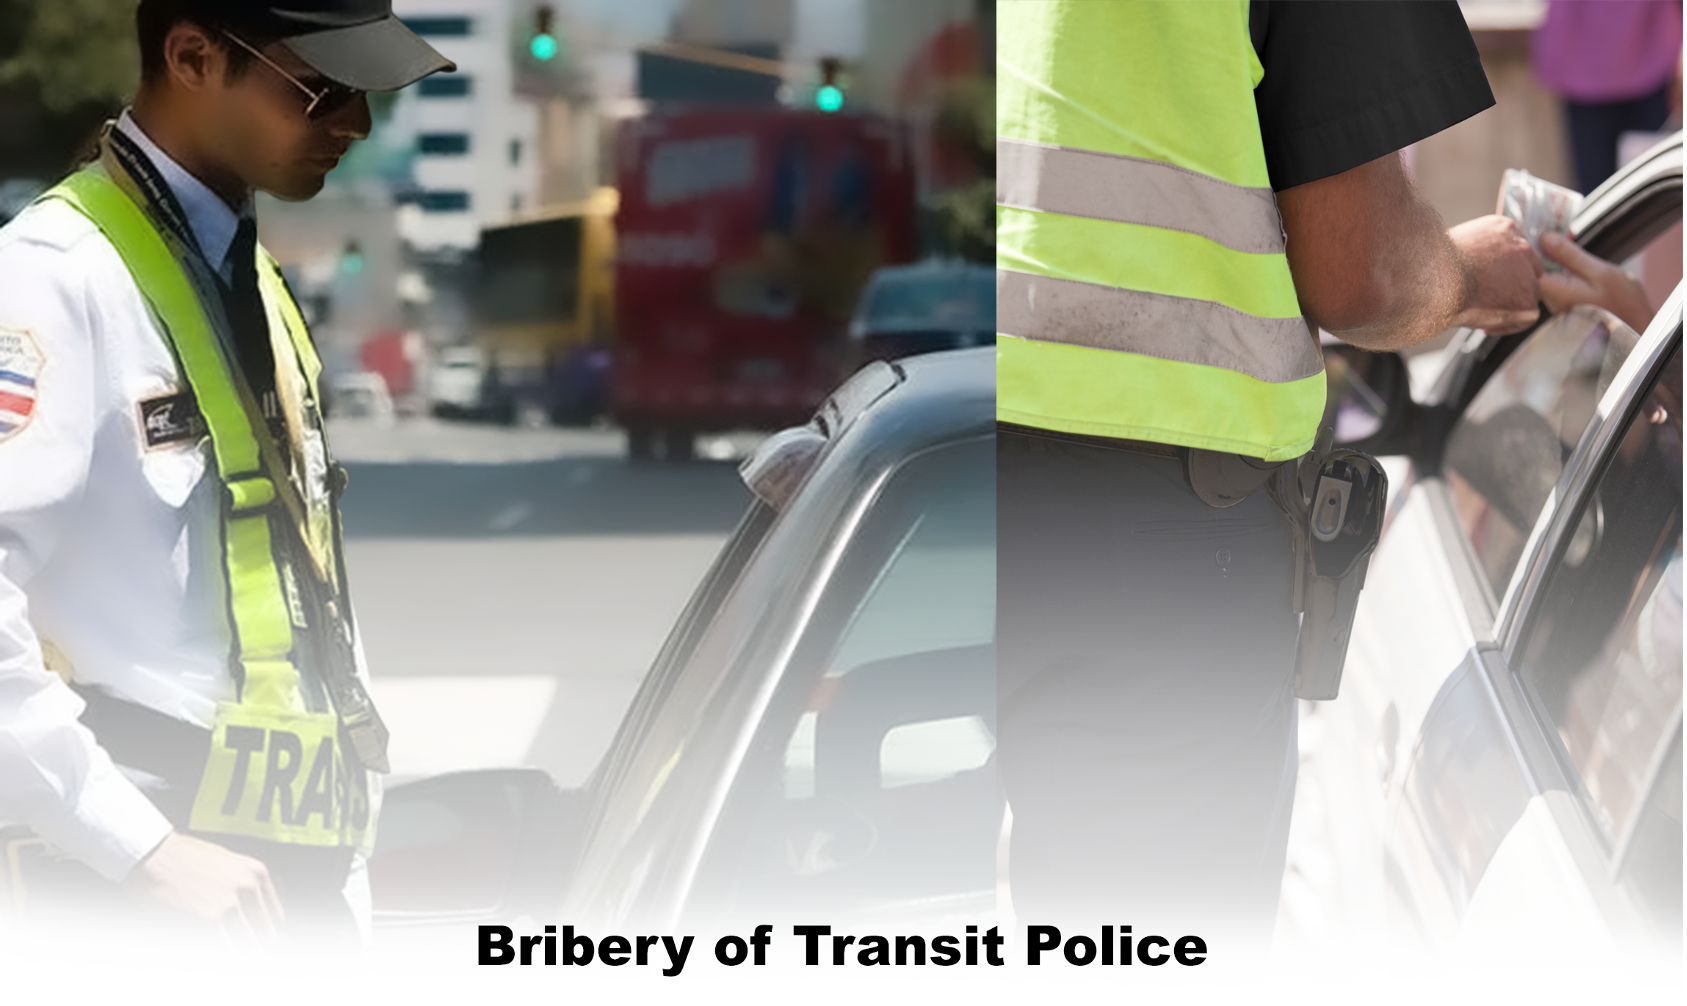 Image depicting bribery of transit police (don't do it!)